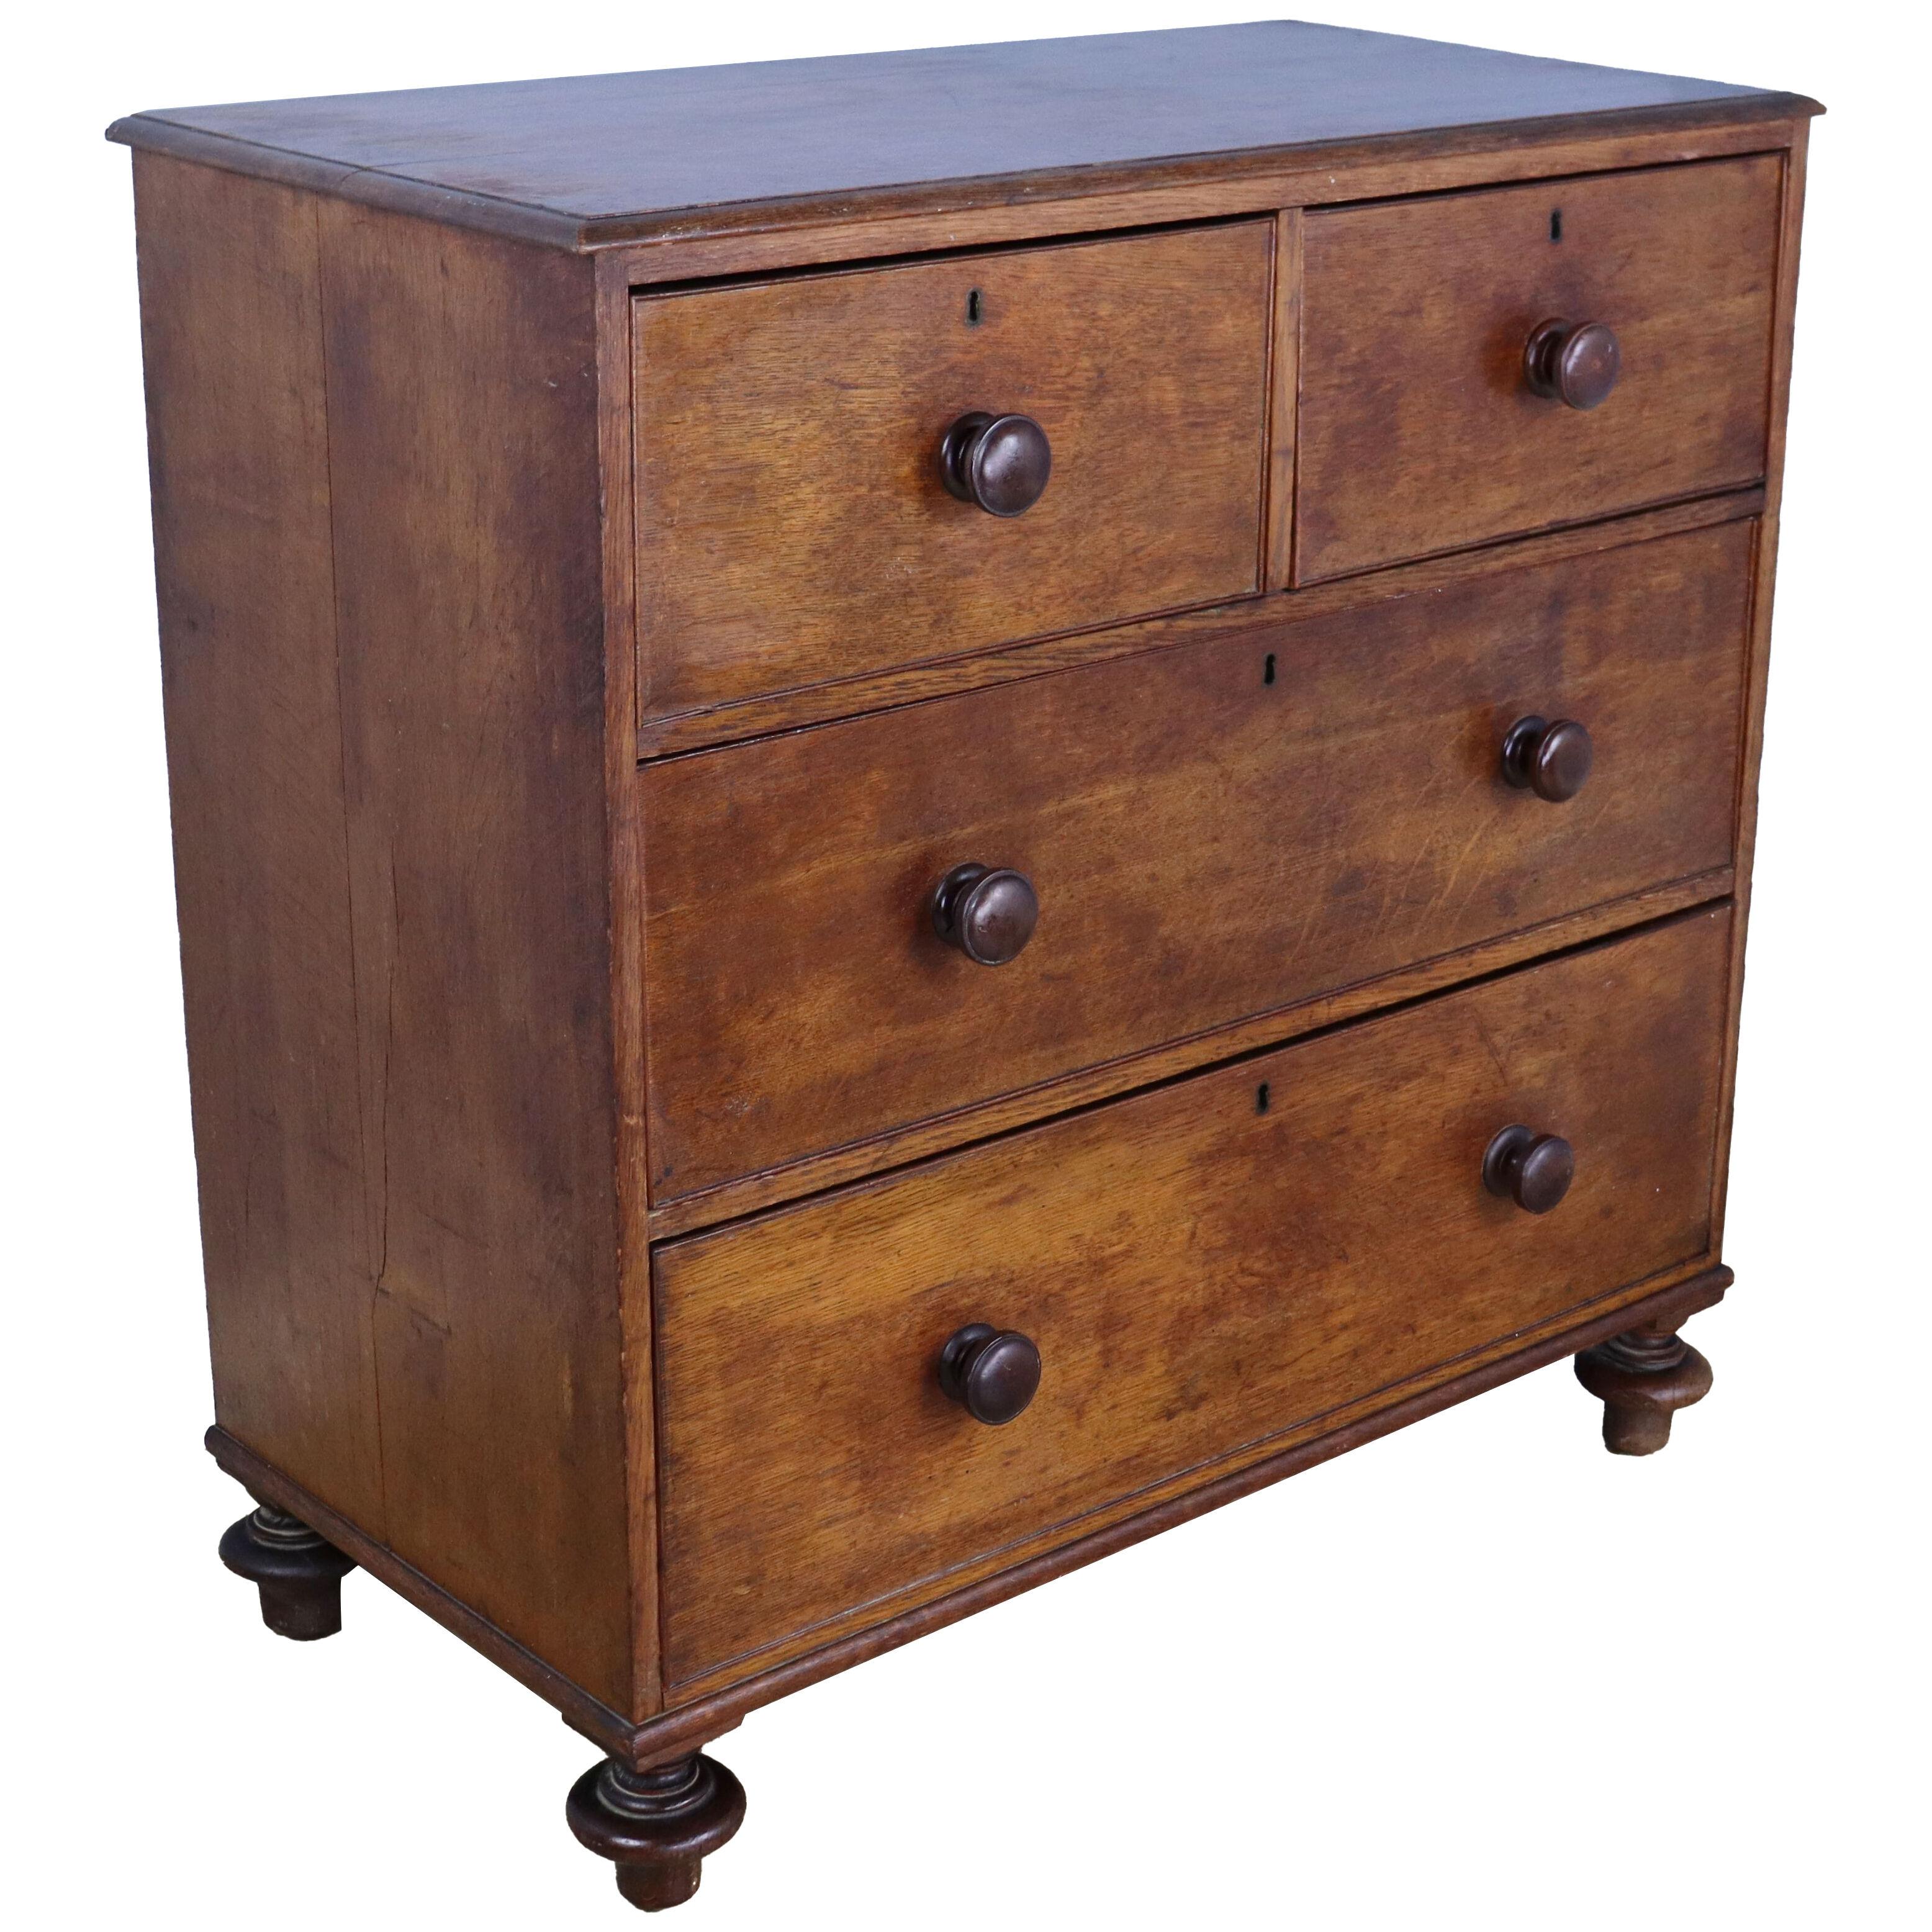 Victorian Oak Chest of Drawers